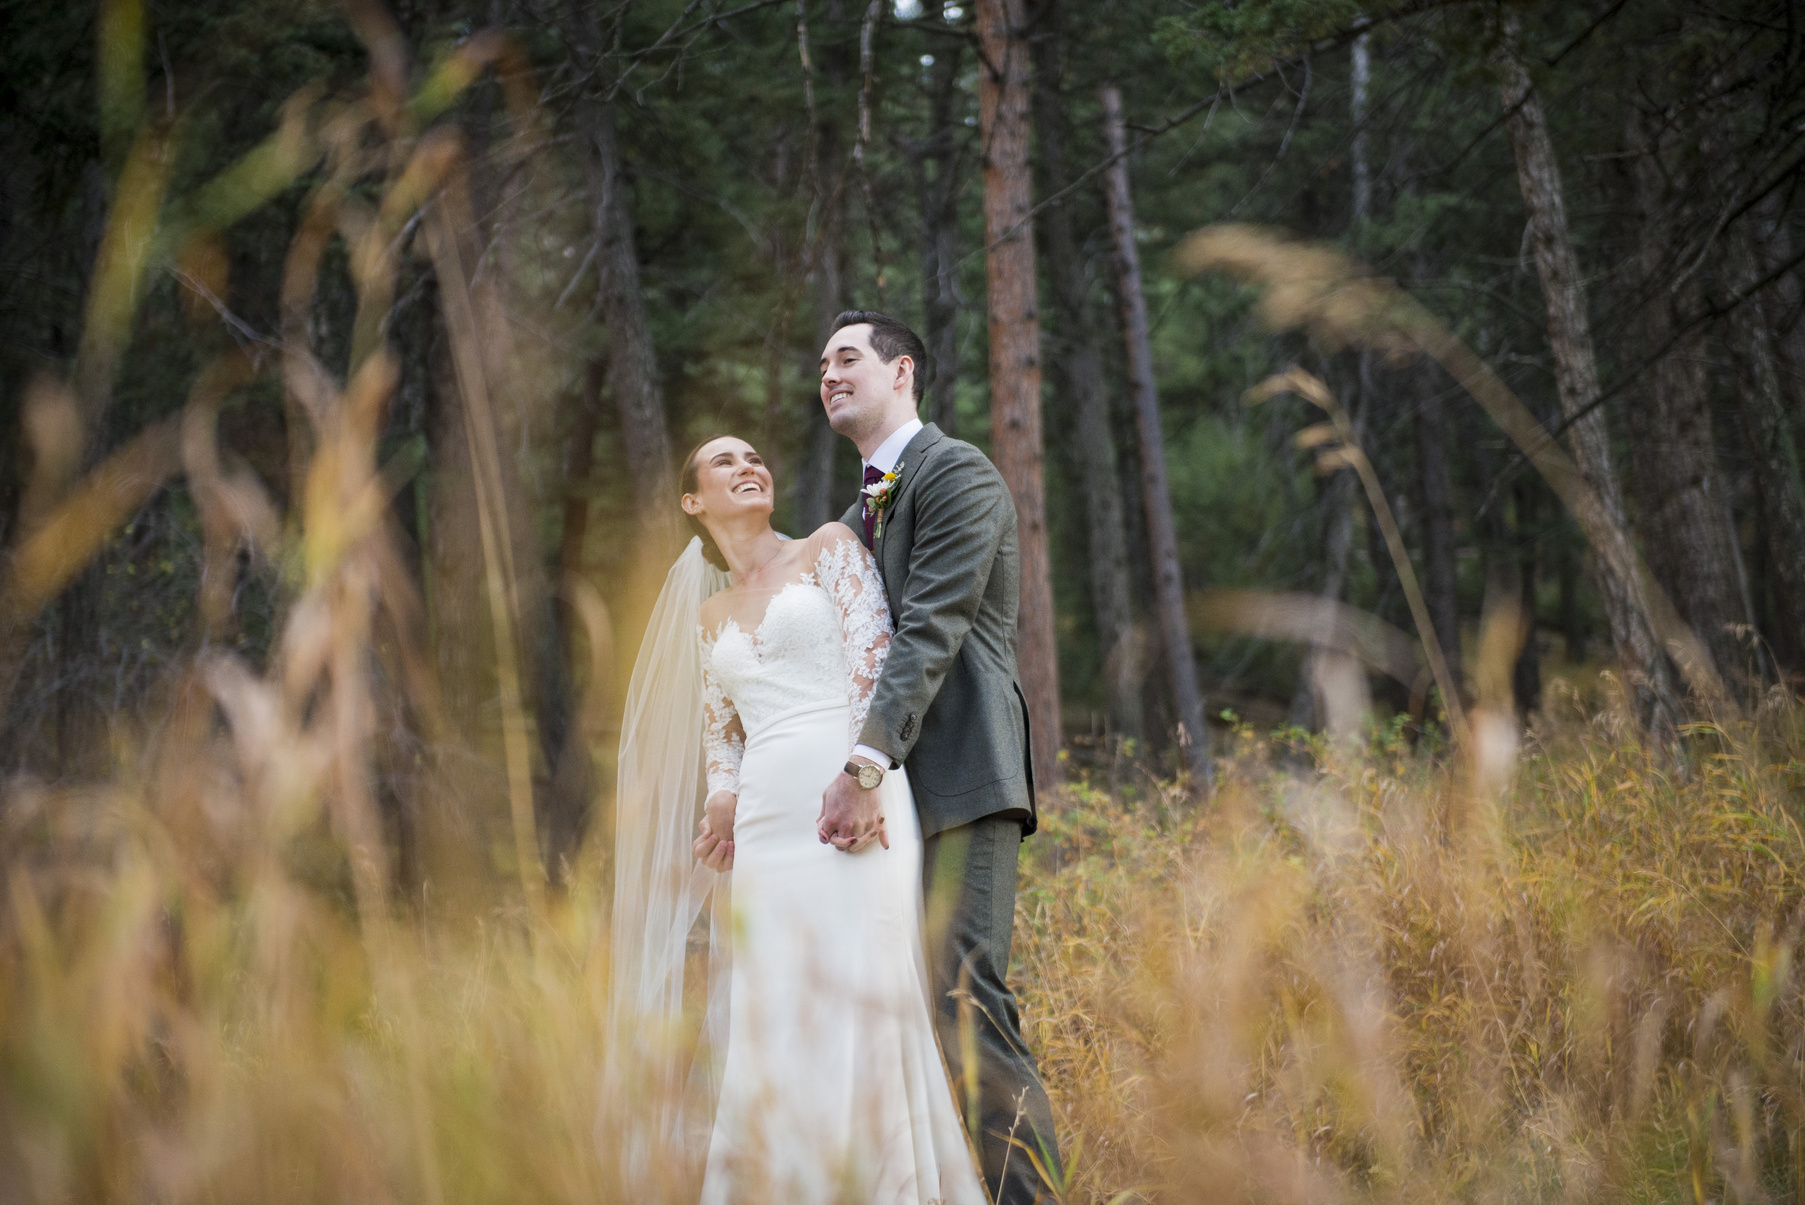 A bride and groom playfully look at each other in a golden field at The Pines at Genesee in Genesee, Colorado.